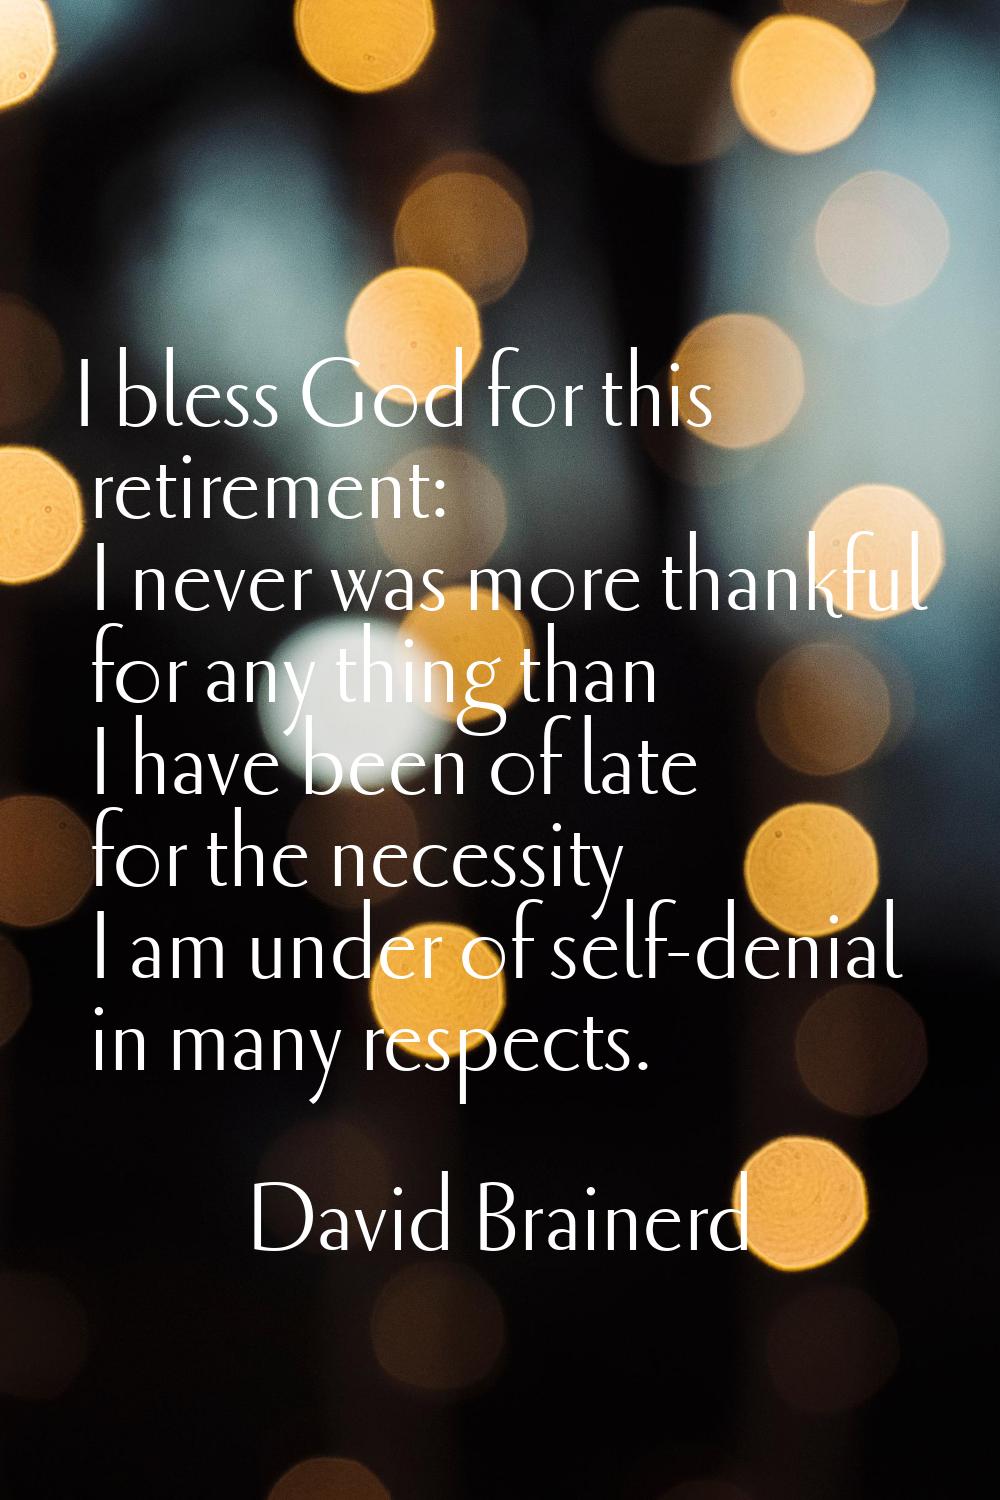 I bless God for this retirement: I never was more thankful for any thing than I have been of late f